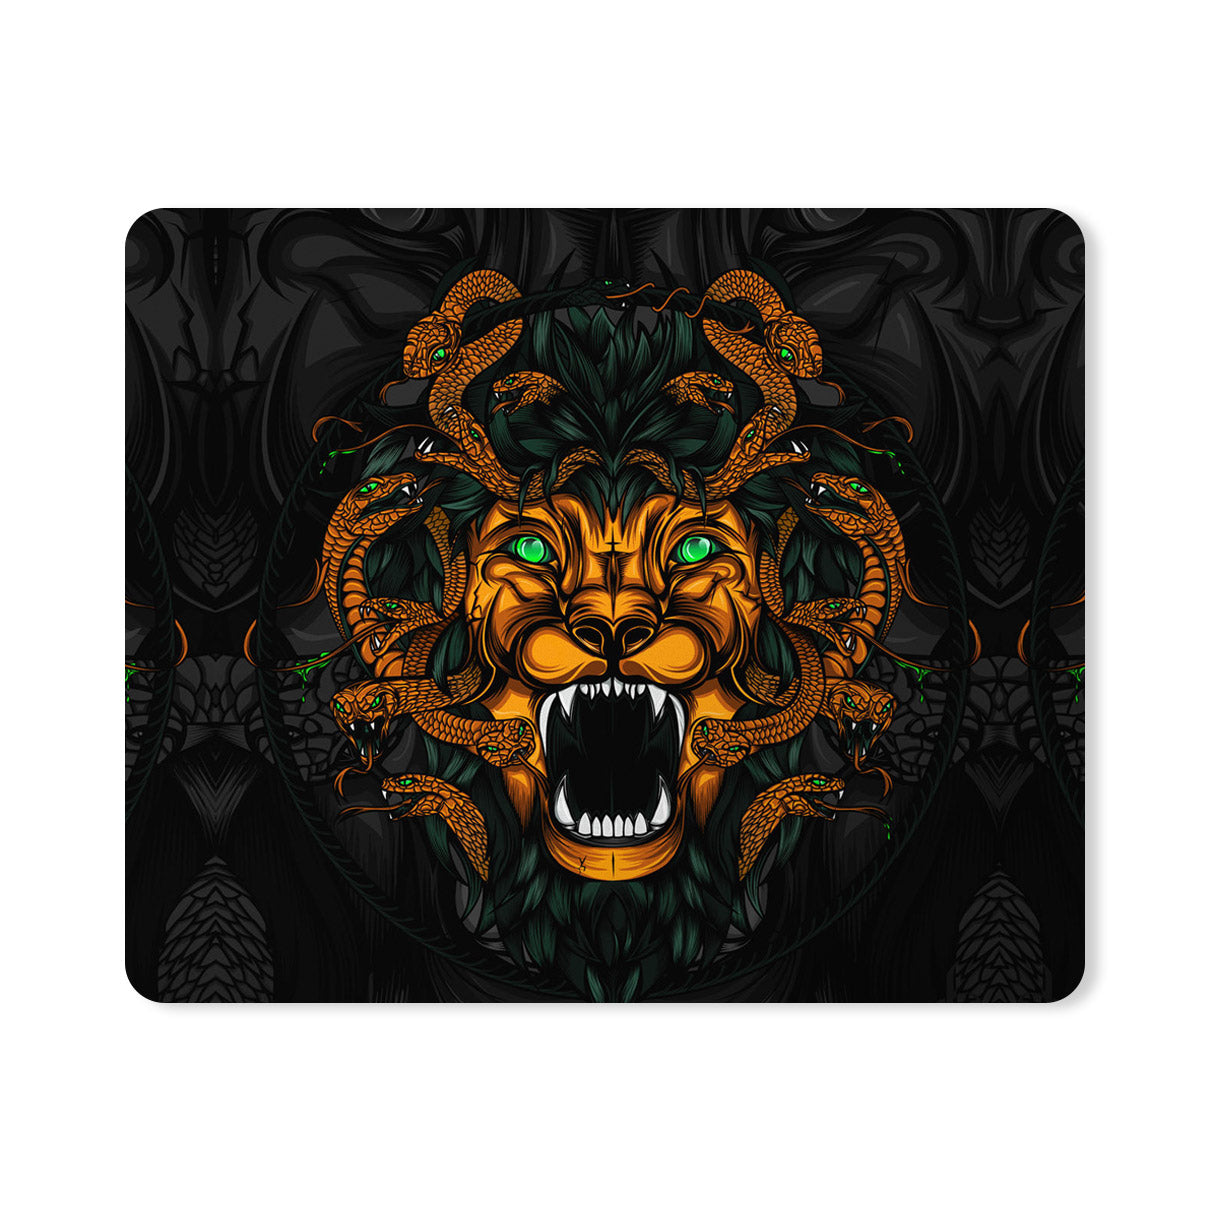 Lion Art Abstract Designer Printed Premium Mouse pad (9 in x 7.5 in)